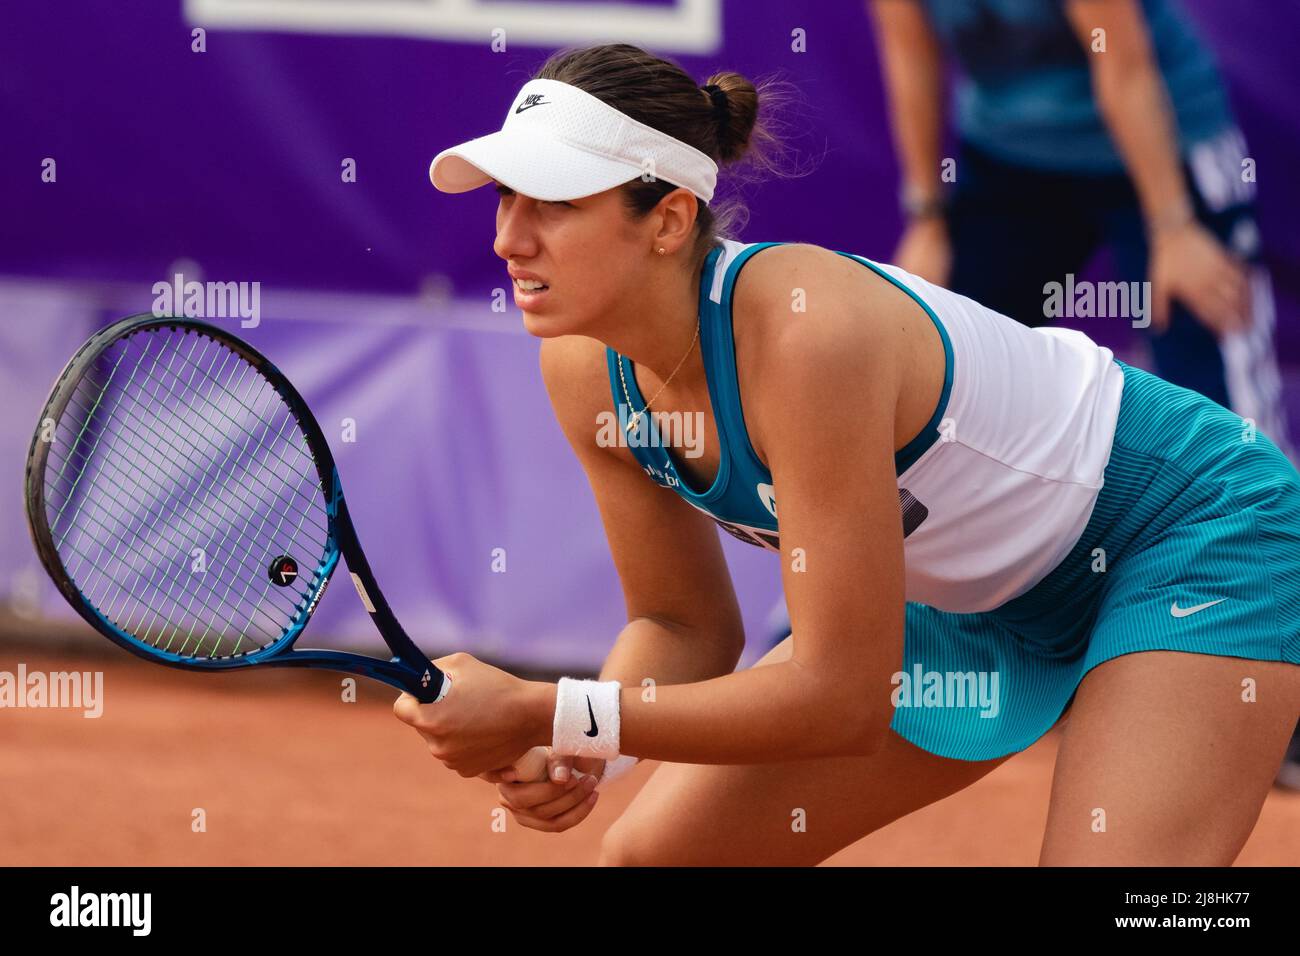 Strasbourg, France. 16th May, 2022. Nefisa Berberovic of Bosnia-Herzegovina  in action during her Round of 32 Singles match of the 2022 Internationaux  de Strasbourg against Sloane Stephens of USA at the Tennis